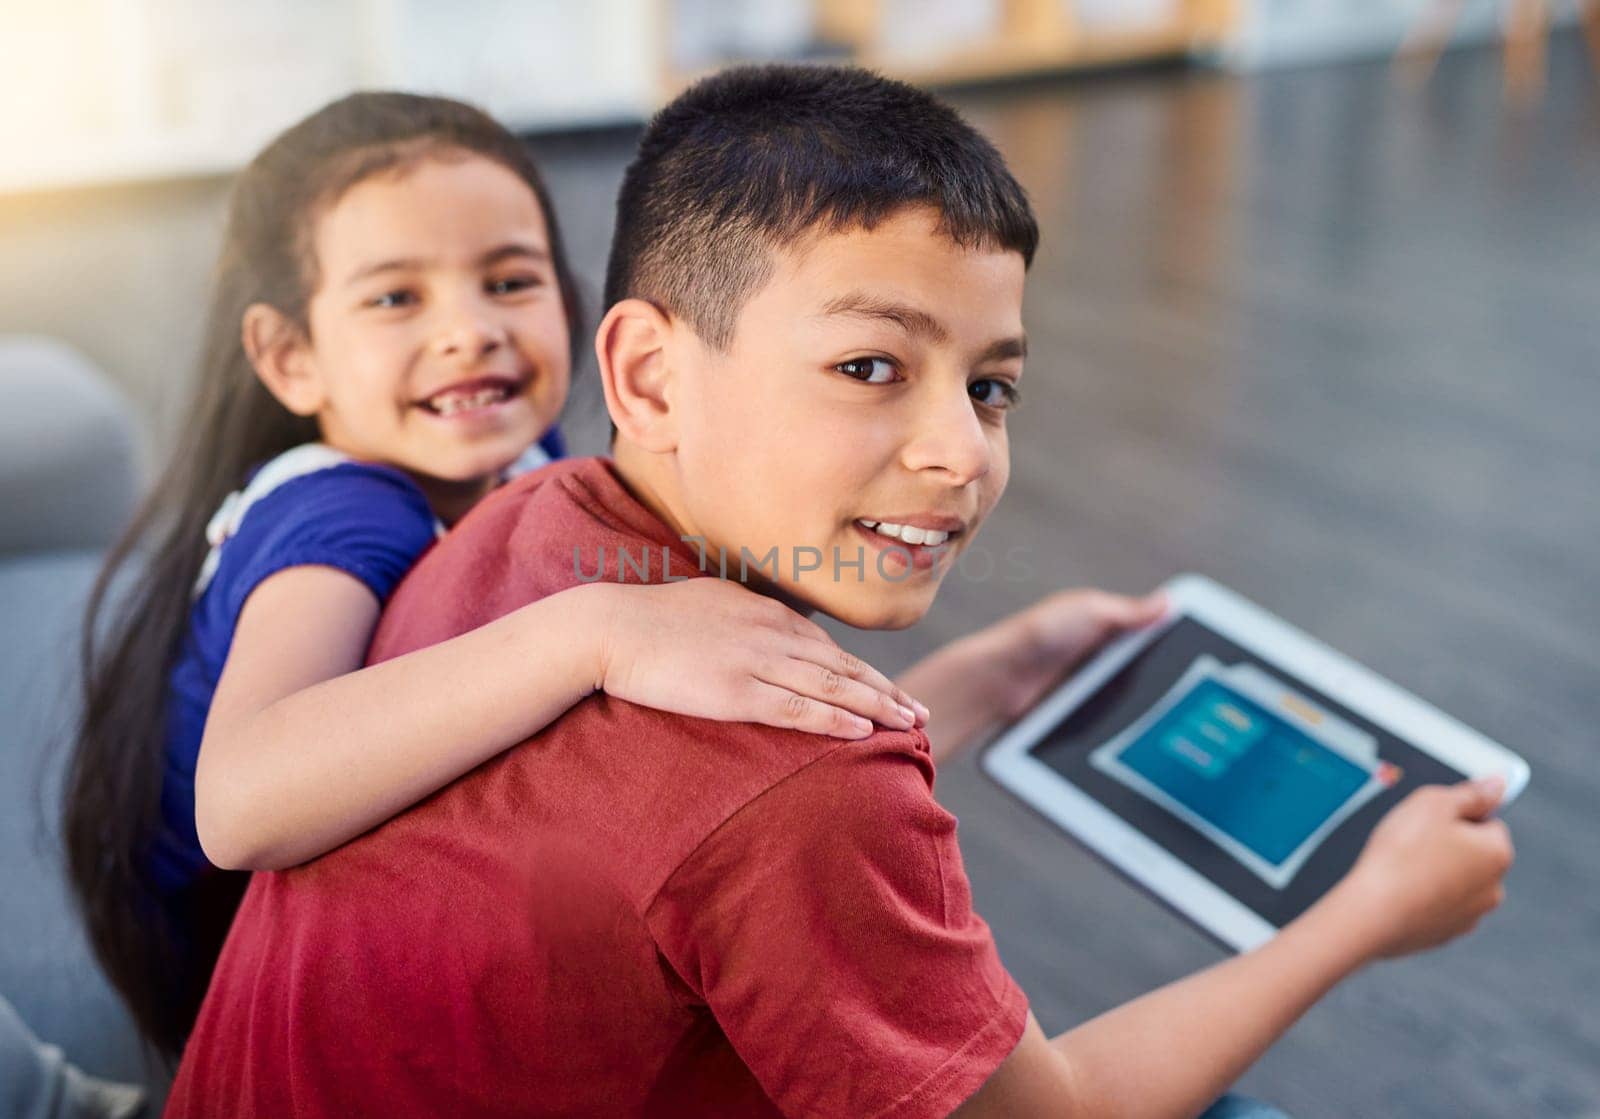 Tablet, kids and portrait with siblings on couch, online and esports for entertainment. Technology, streaming and smile for play on internet in lounge, gaming and digital or mobile app on touchscreen.